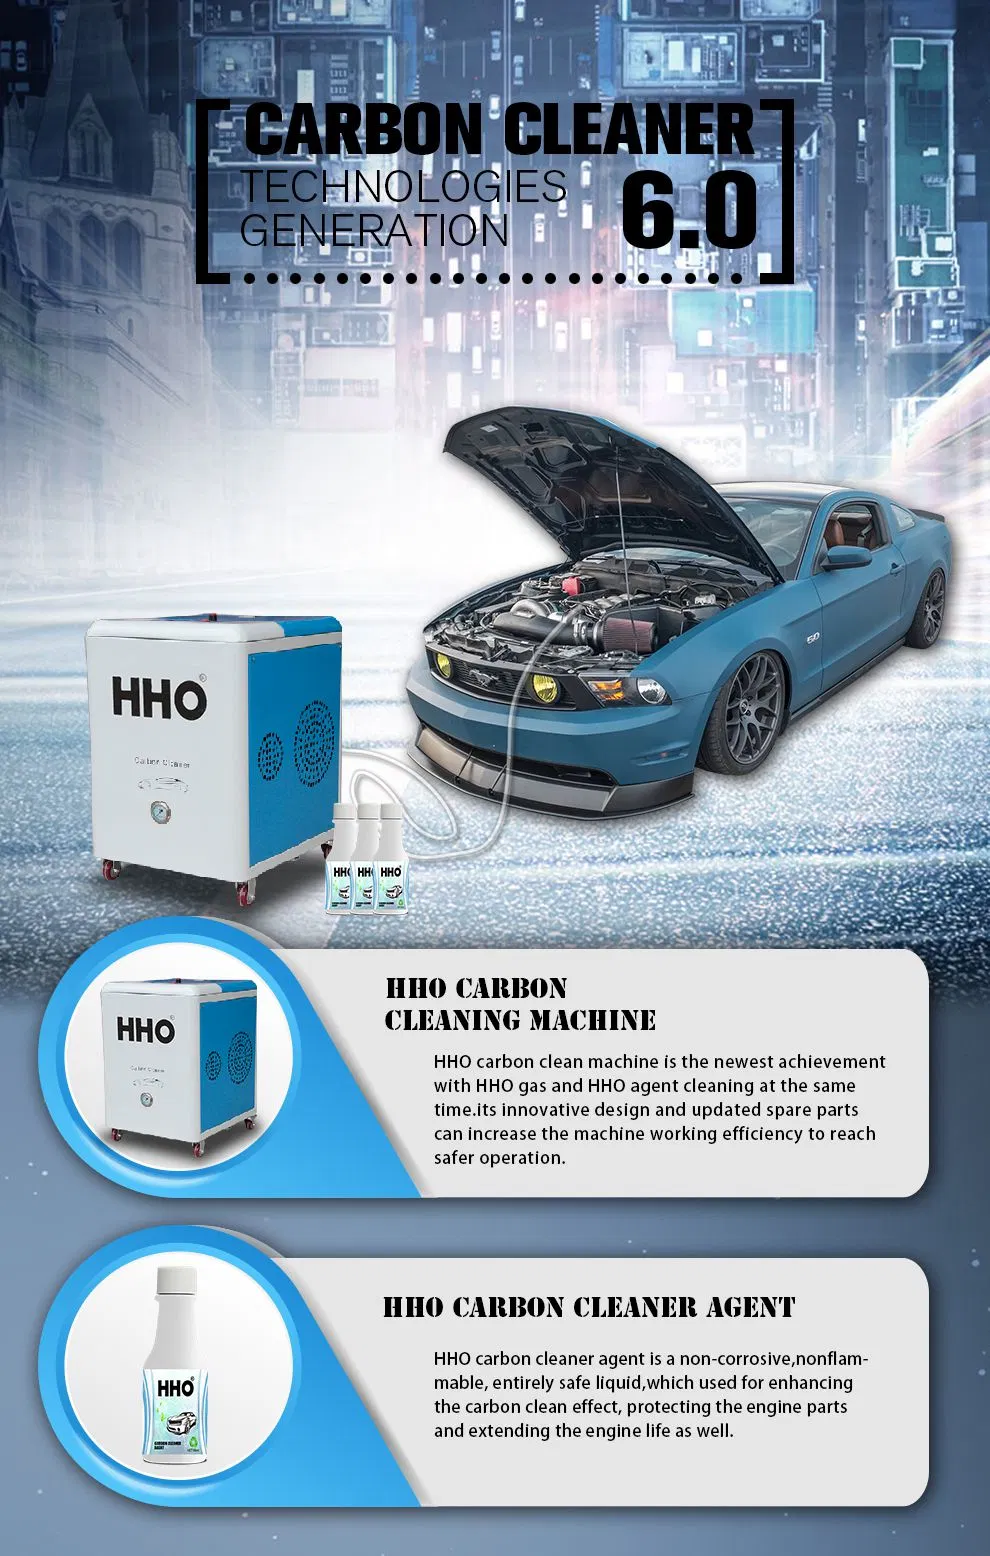 Hho for Car Oxy Hydrogen Generator Price